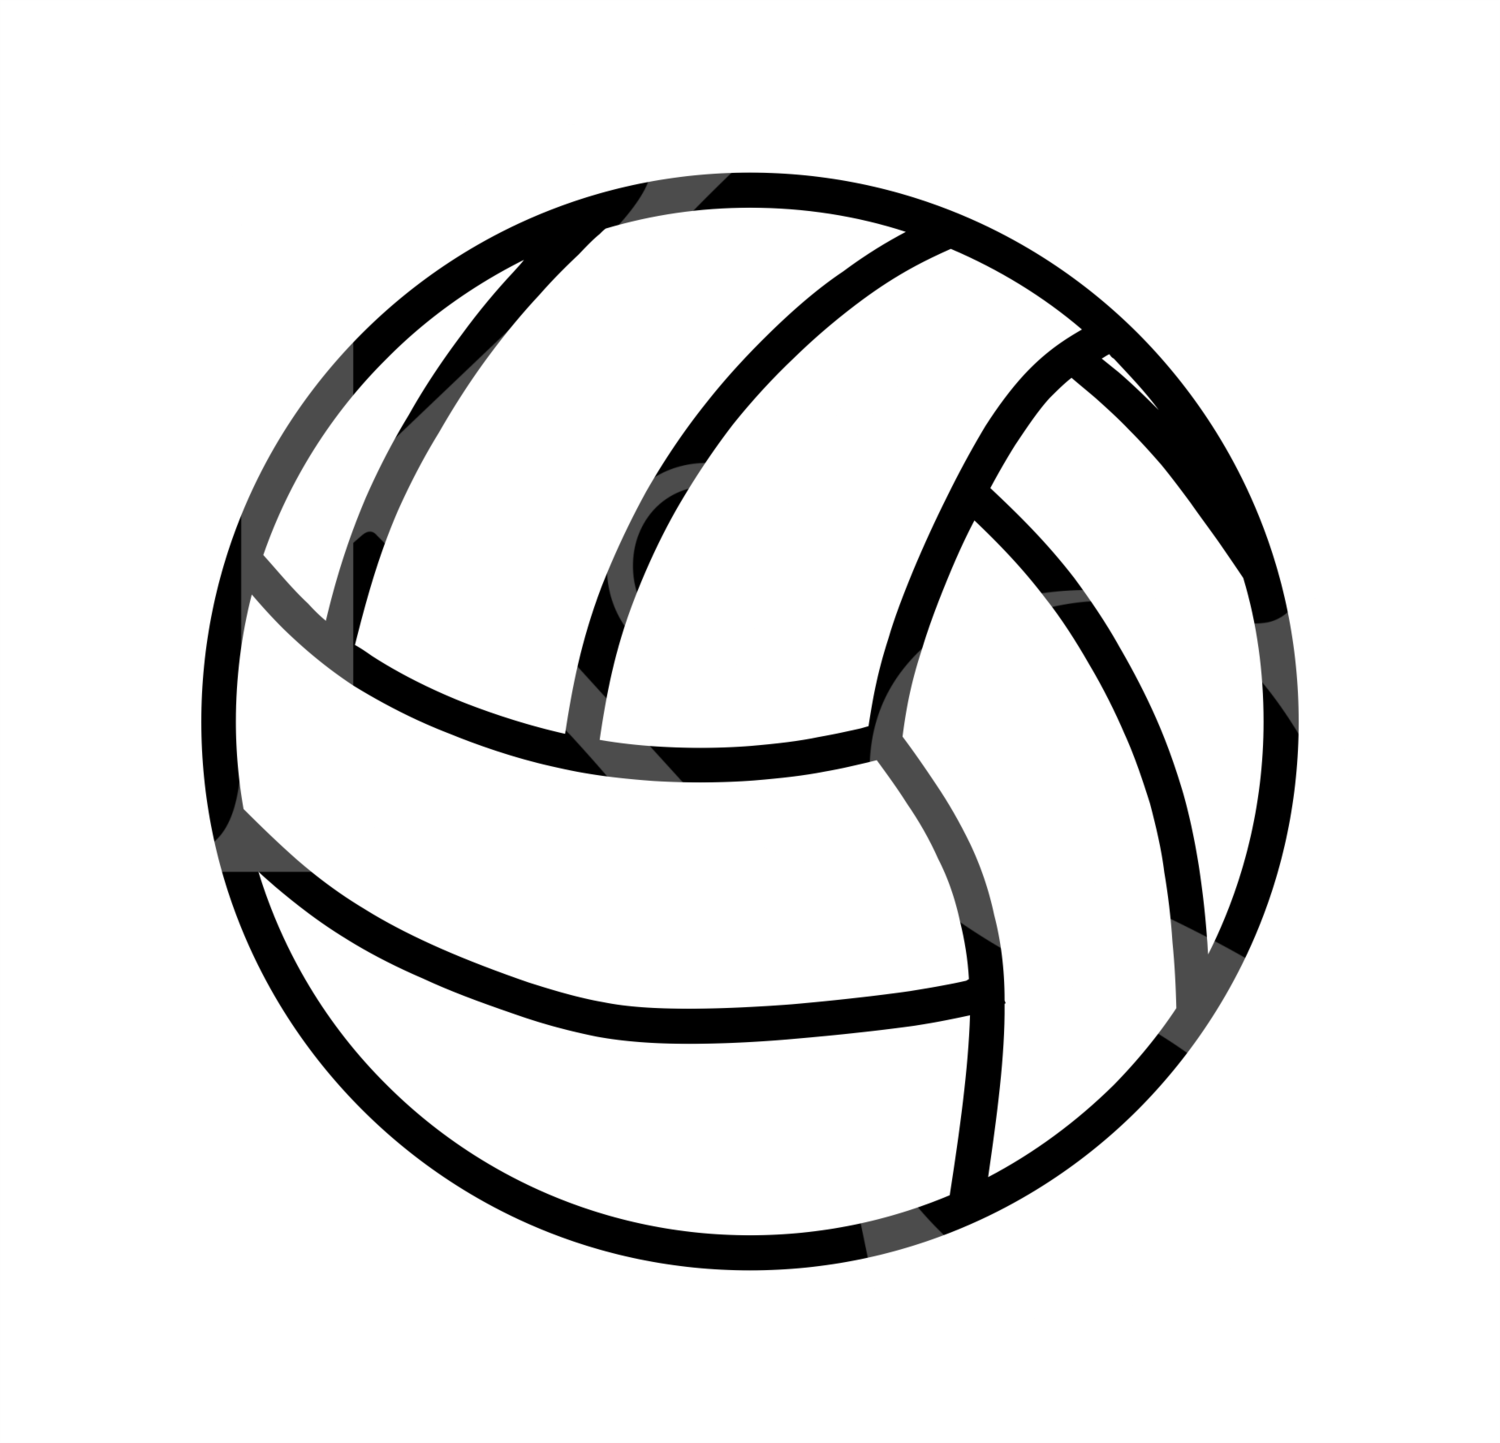 2 Color Volleyball SVG, Volleyball Color Ball SVG, Ball Svg, SVG File for Cricut, Cut File, Print File, Custom Volleyball Ball Svg